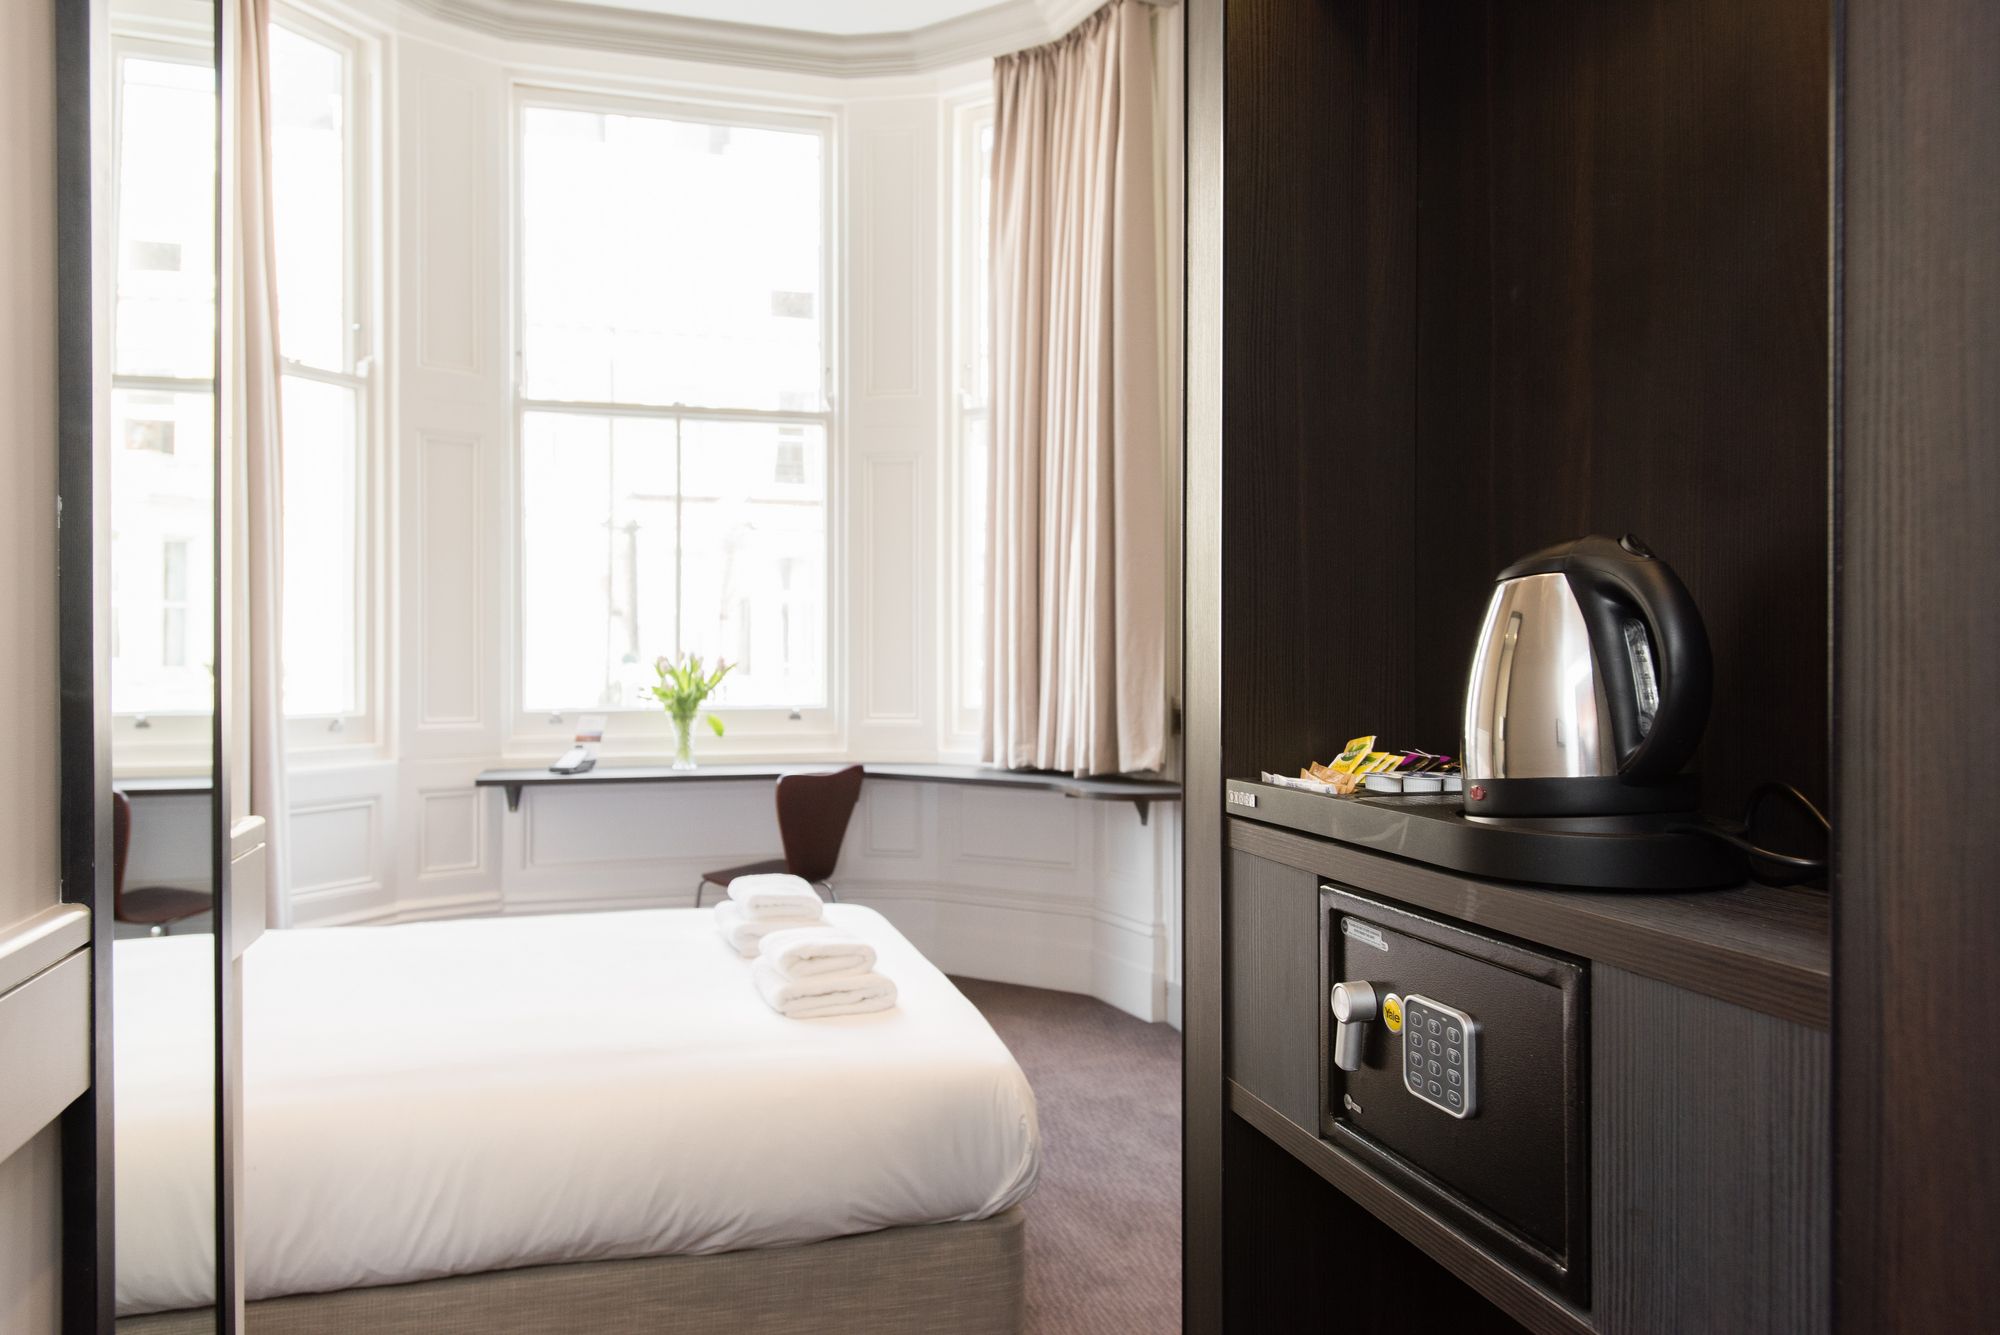 Celebrate St. Patrick's Day in London: Get Cozy at Mowbray Court Hotel in Earls Court!